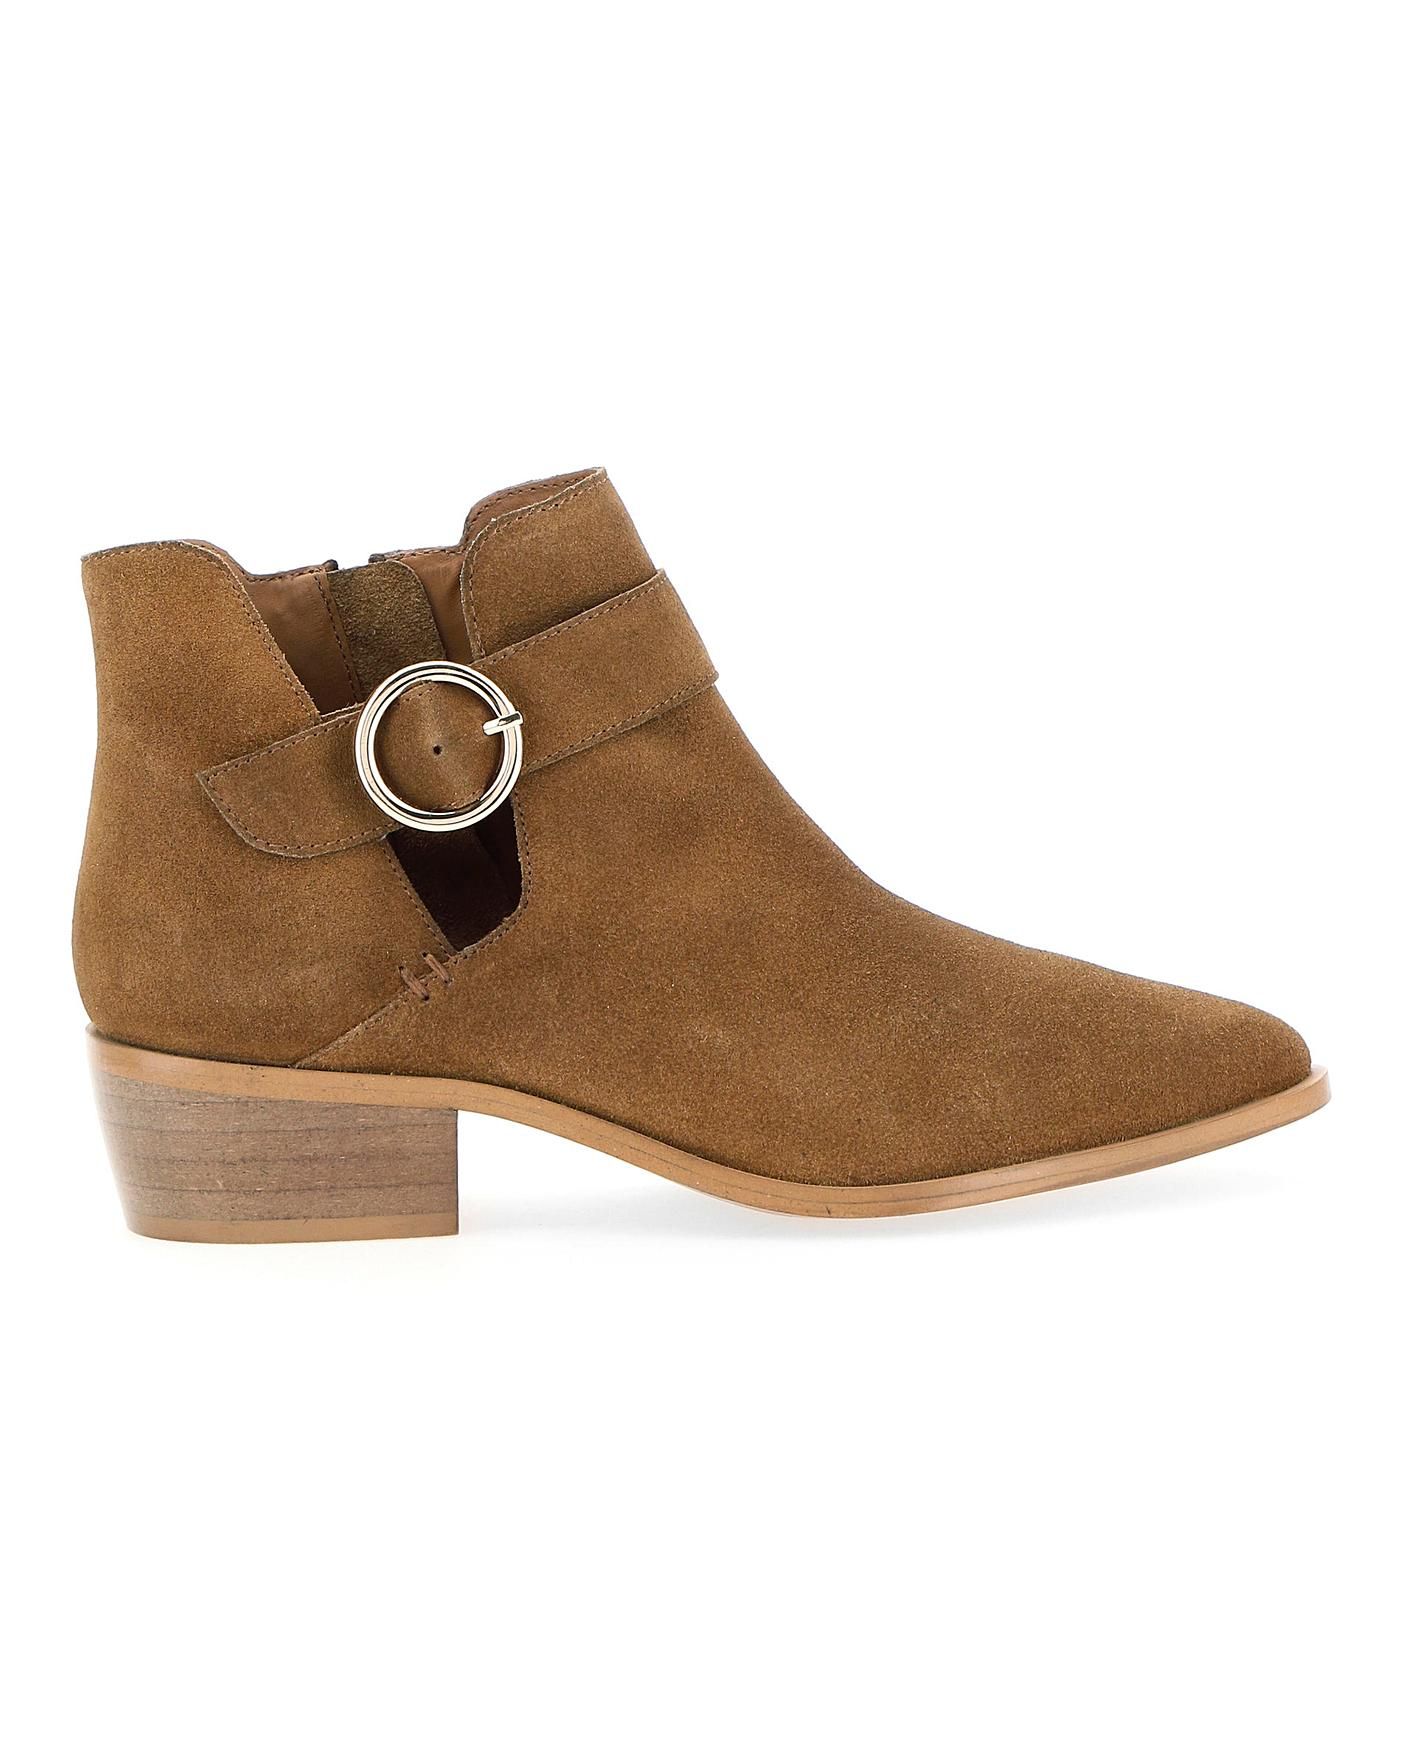 Odette Suede Buckle Detail Boots Extra Wide EEE Fit | Simply Be (UK)